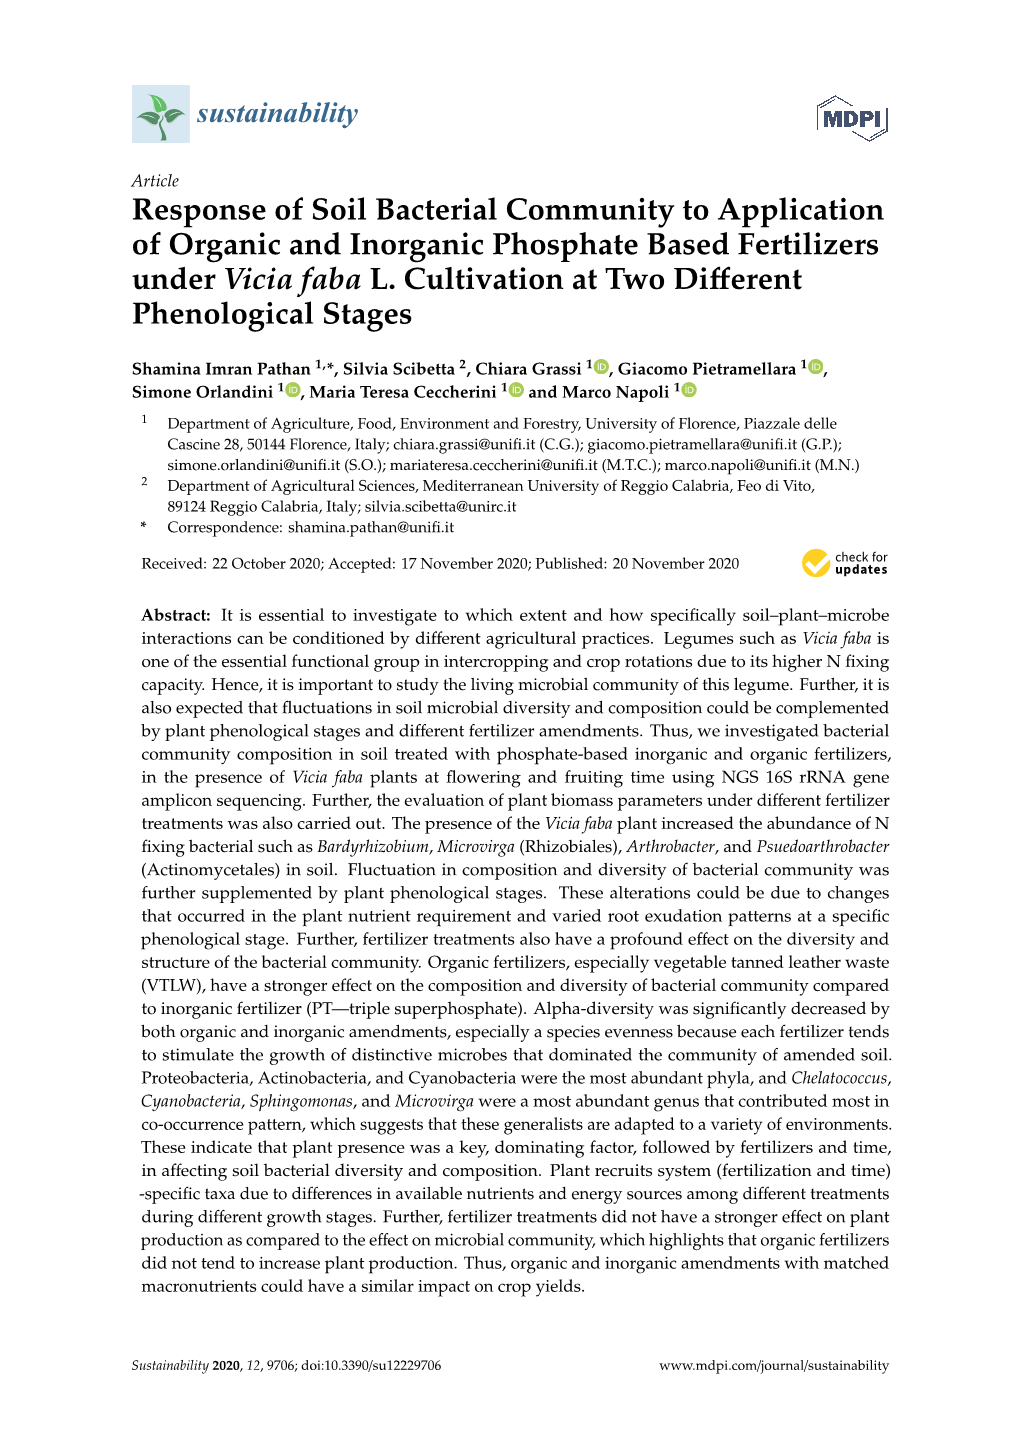 Response of Soil Bacterial Community to Application of Organic and Inorganic Phosphate Based Fertilizers Under Vicia Faba L